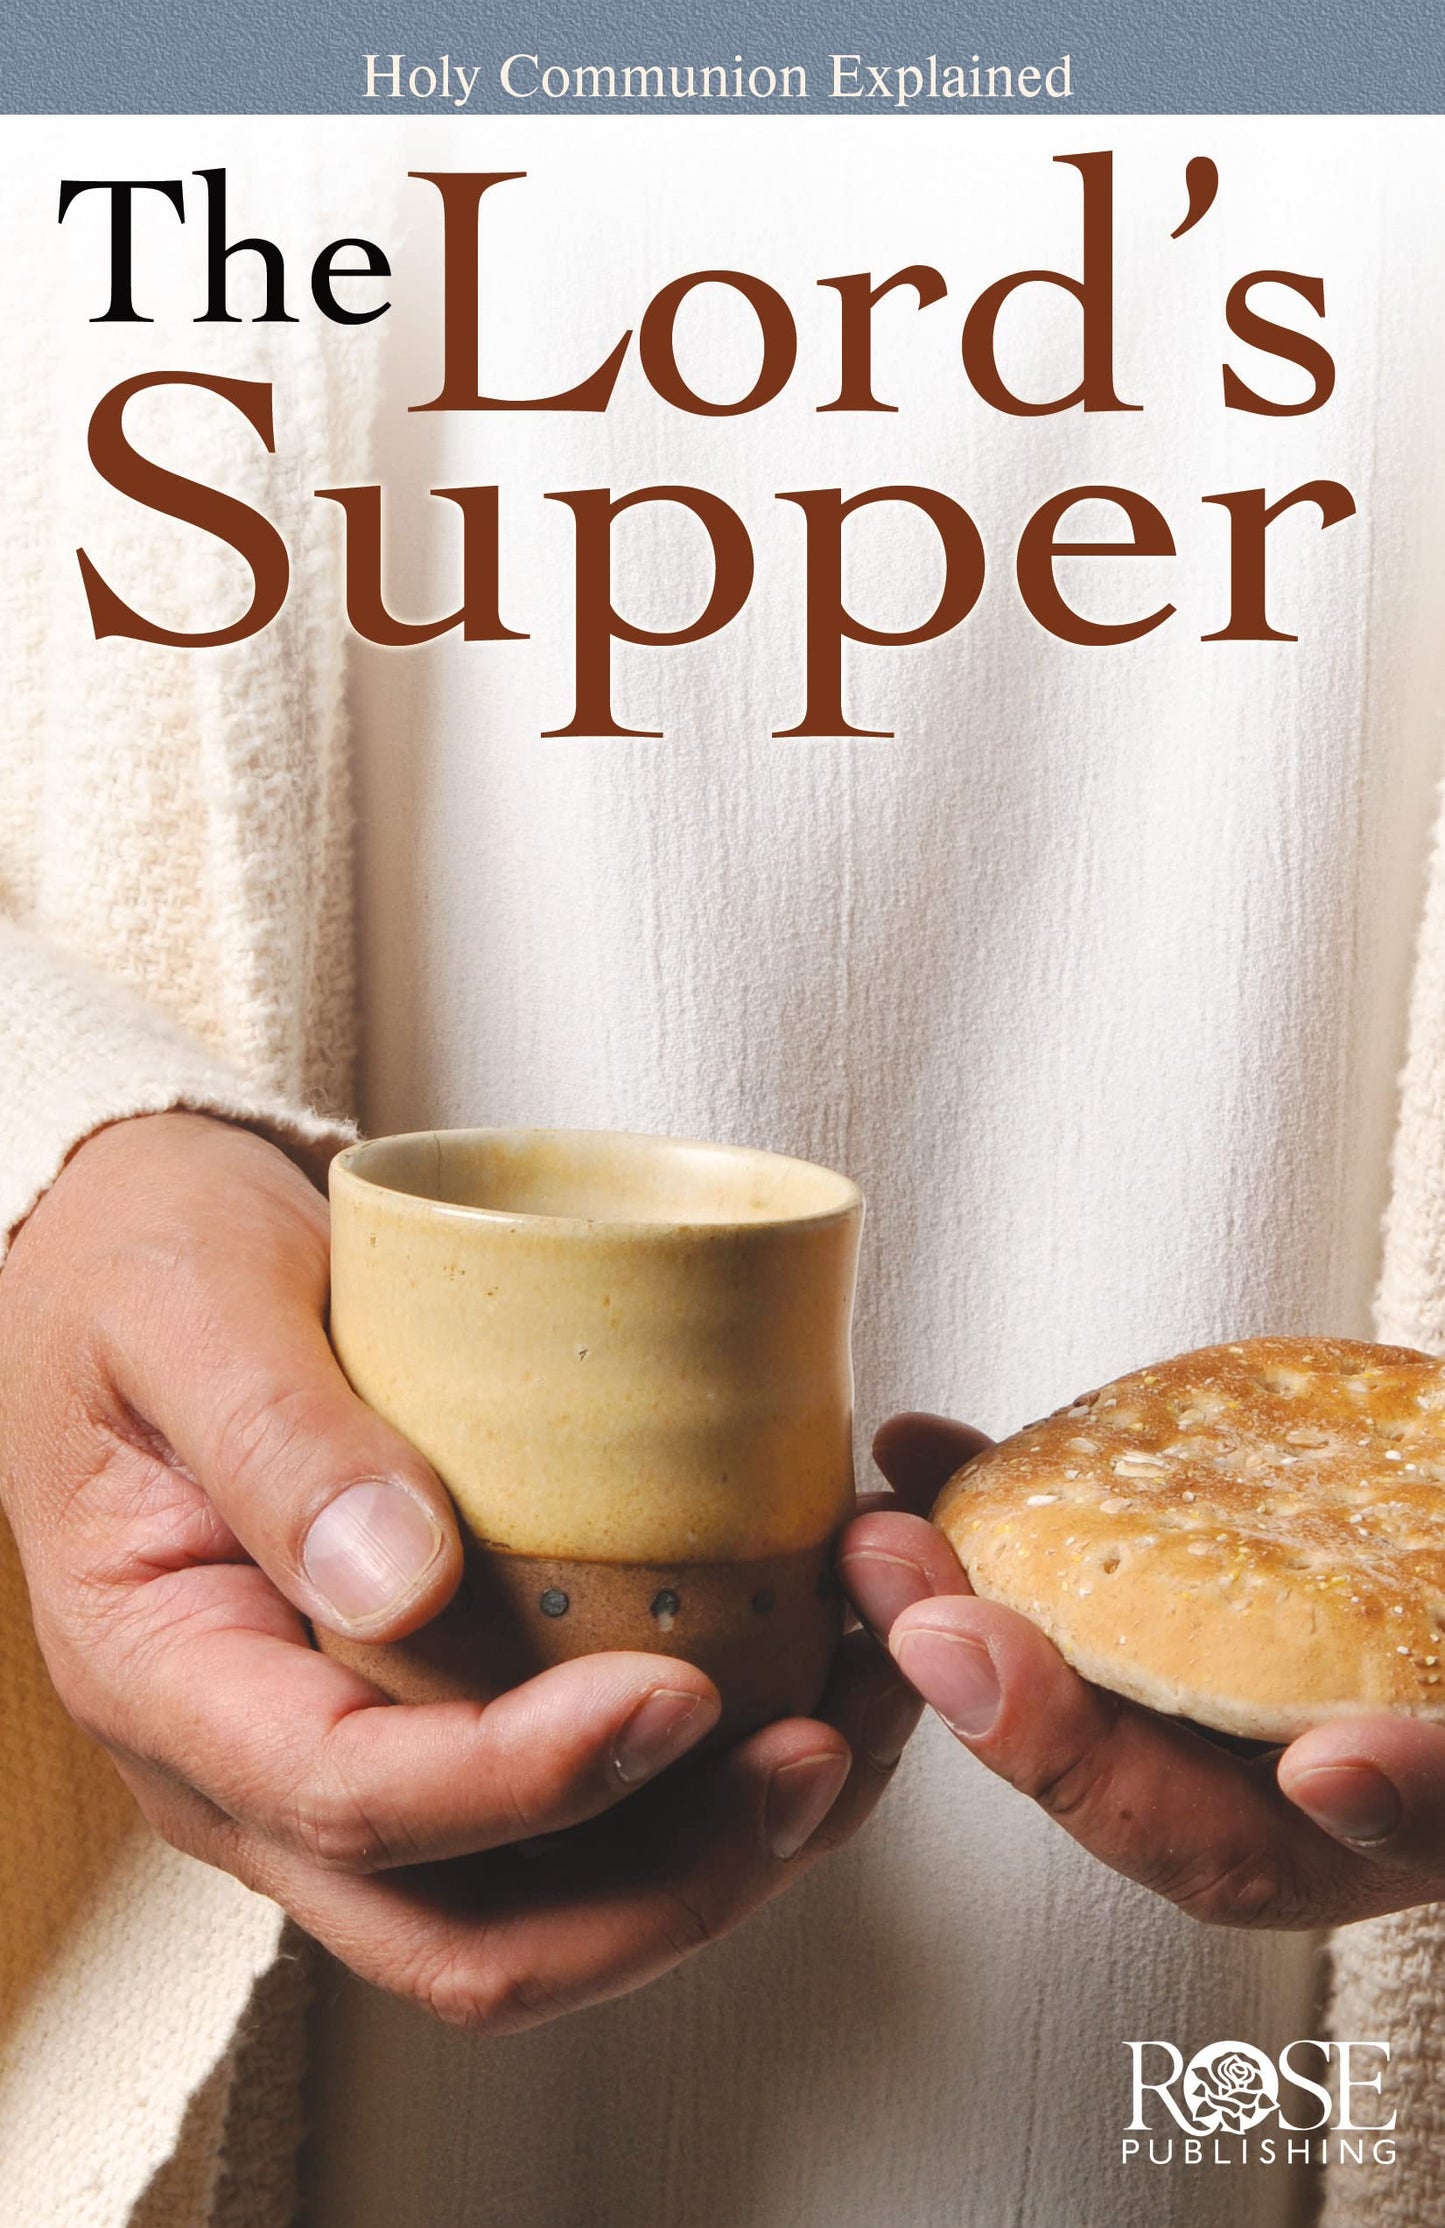 PAMPHLET- The Lord's Supper: Holy Communion Explained